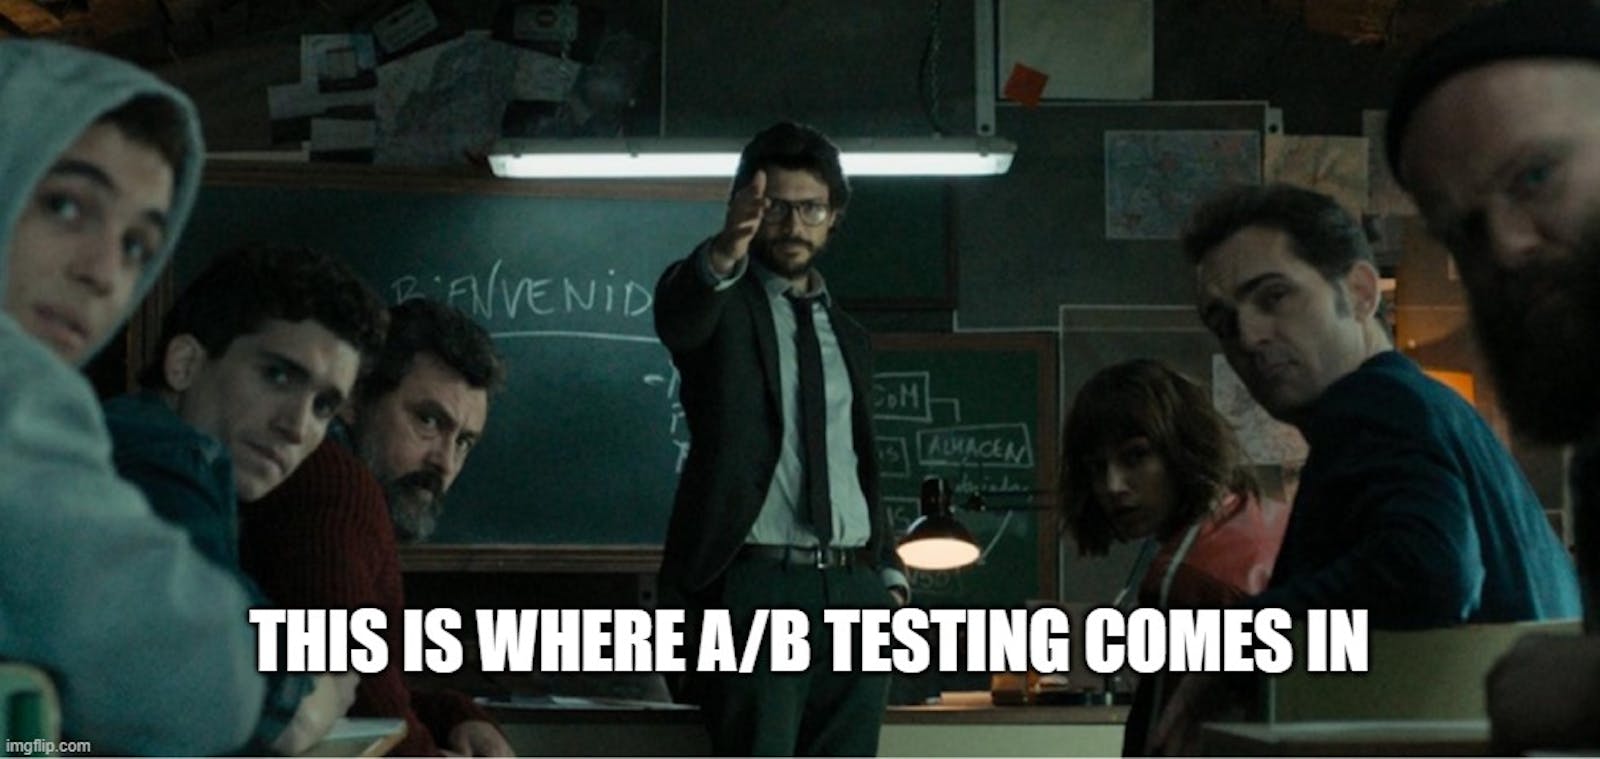 A/B Testing: Building Better Products Through Experiments